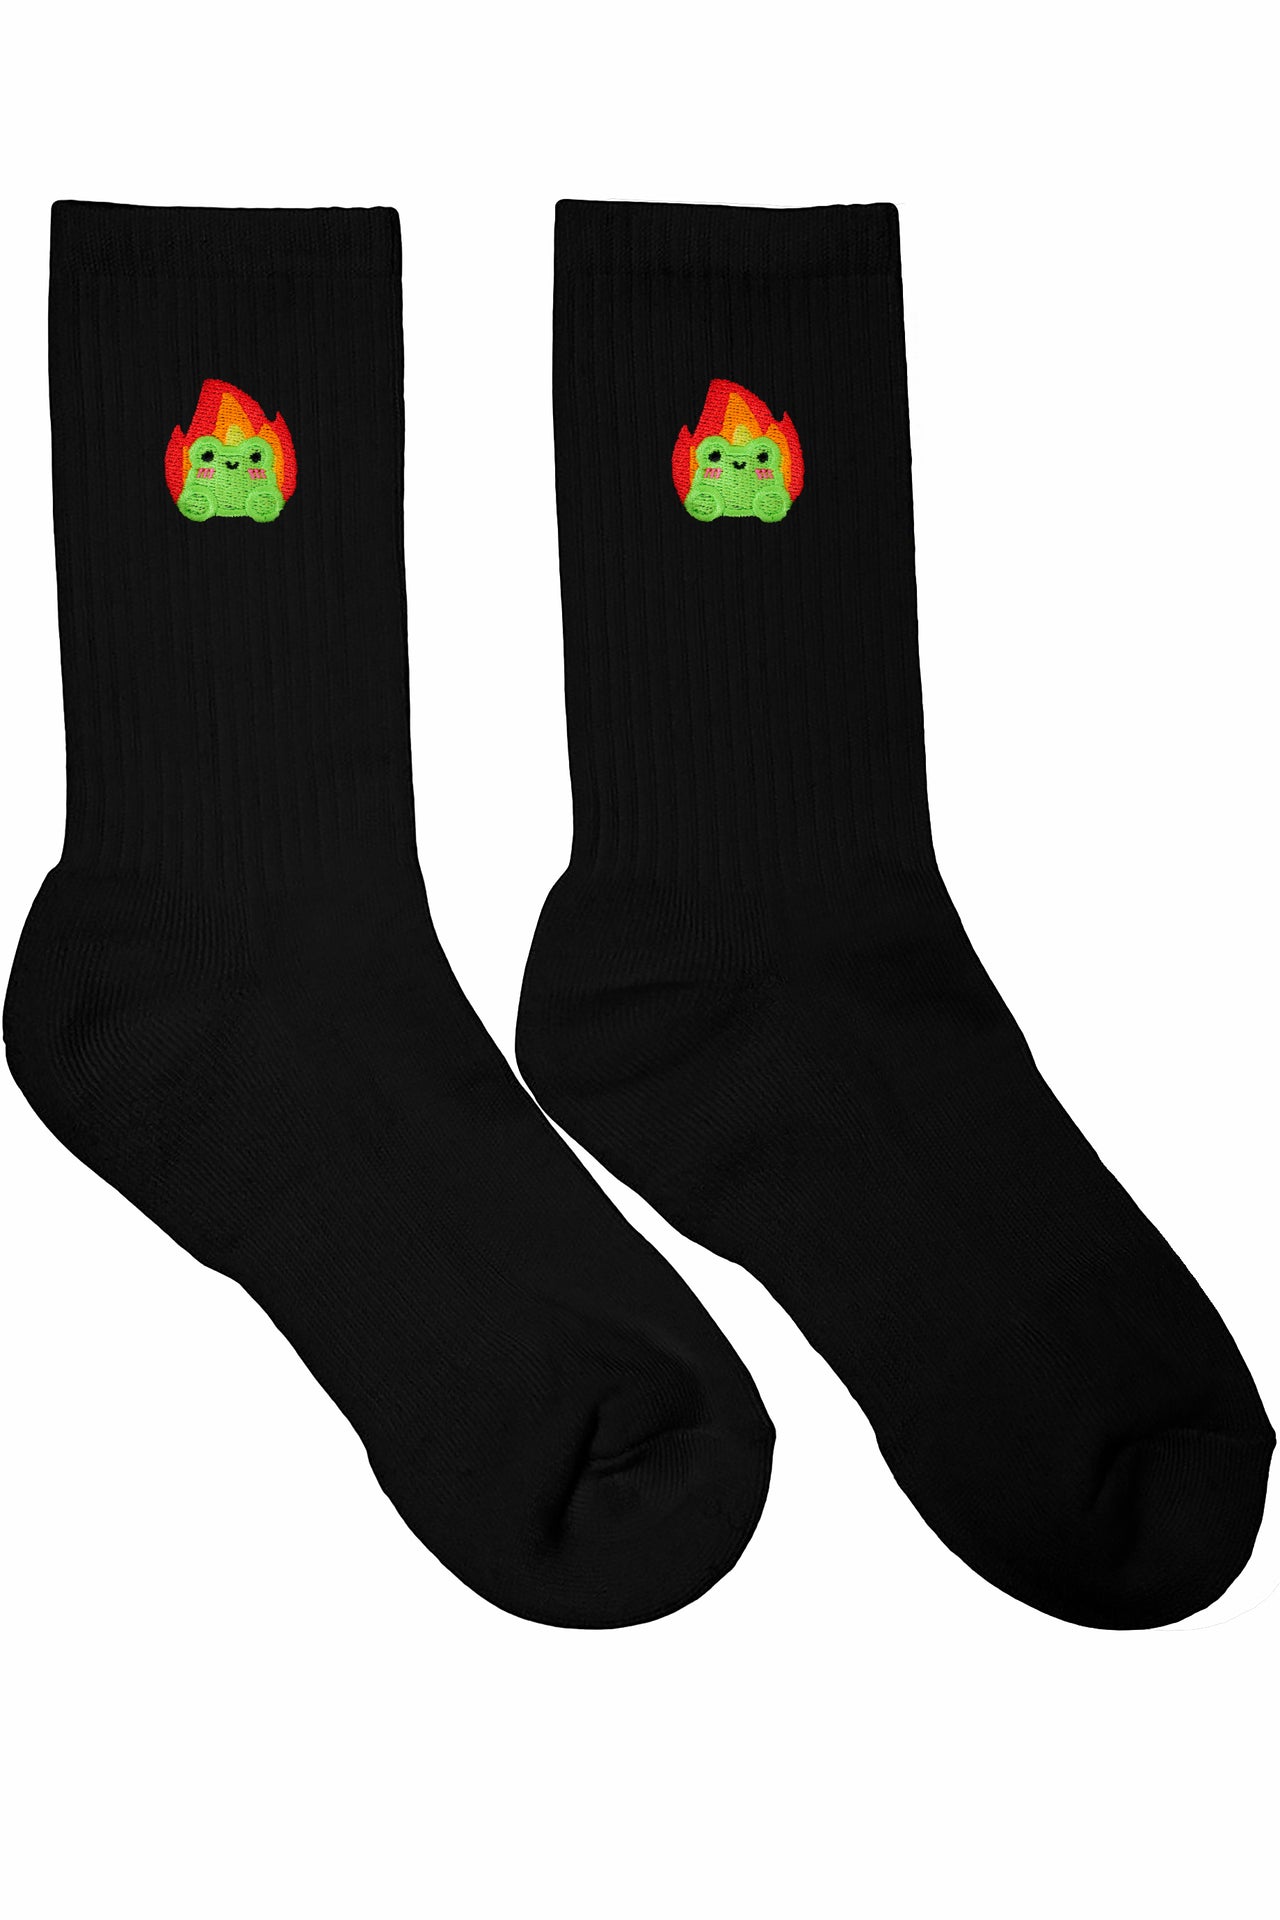 Albert In Flames Embroidered Socks